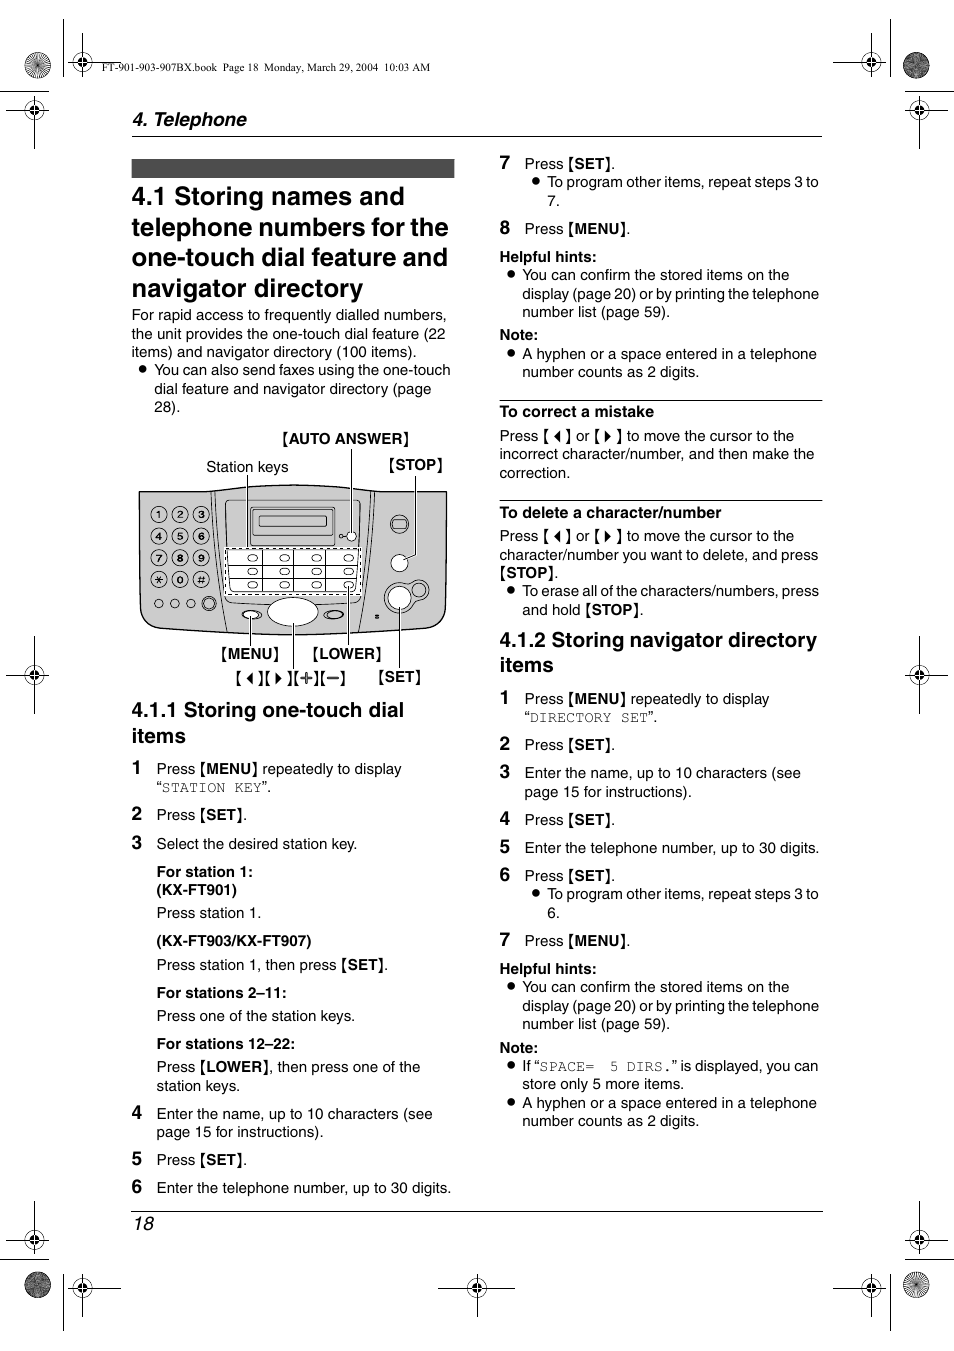 Telephone, Automatic dialling, 1 storing one-touch dial items | 2 storing navigator directory items | Panasonic KX-FT901BX User Manual | Page 18 / 64